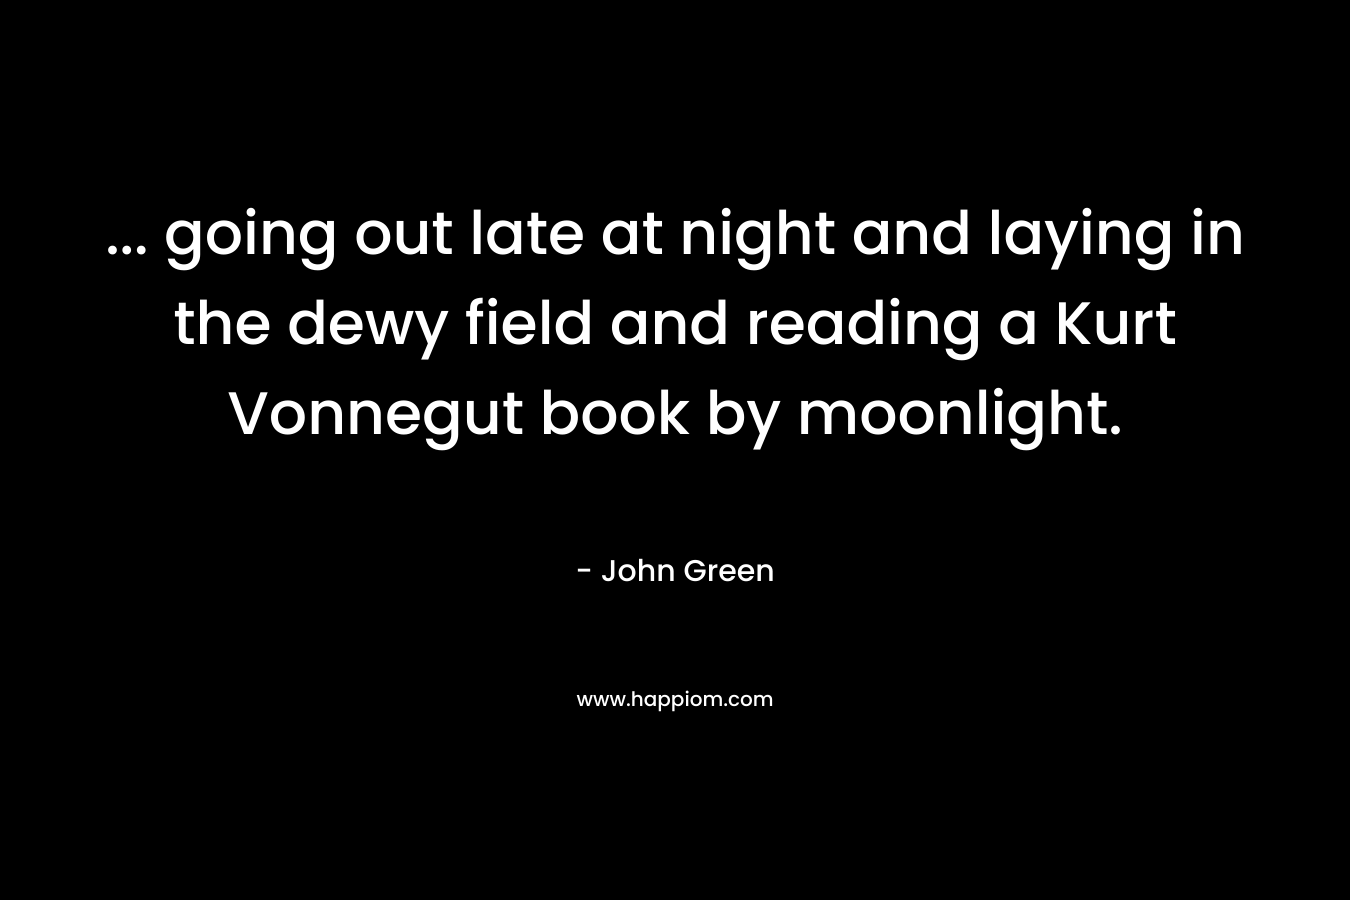 ... going out late at night and laying in the dewy field and reading a Kurt Vonnegut book by moonlight.